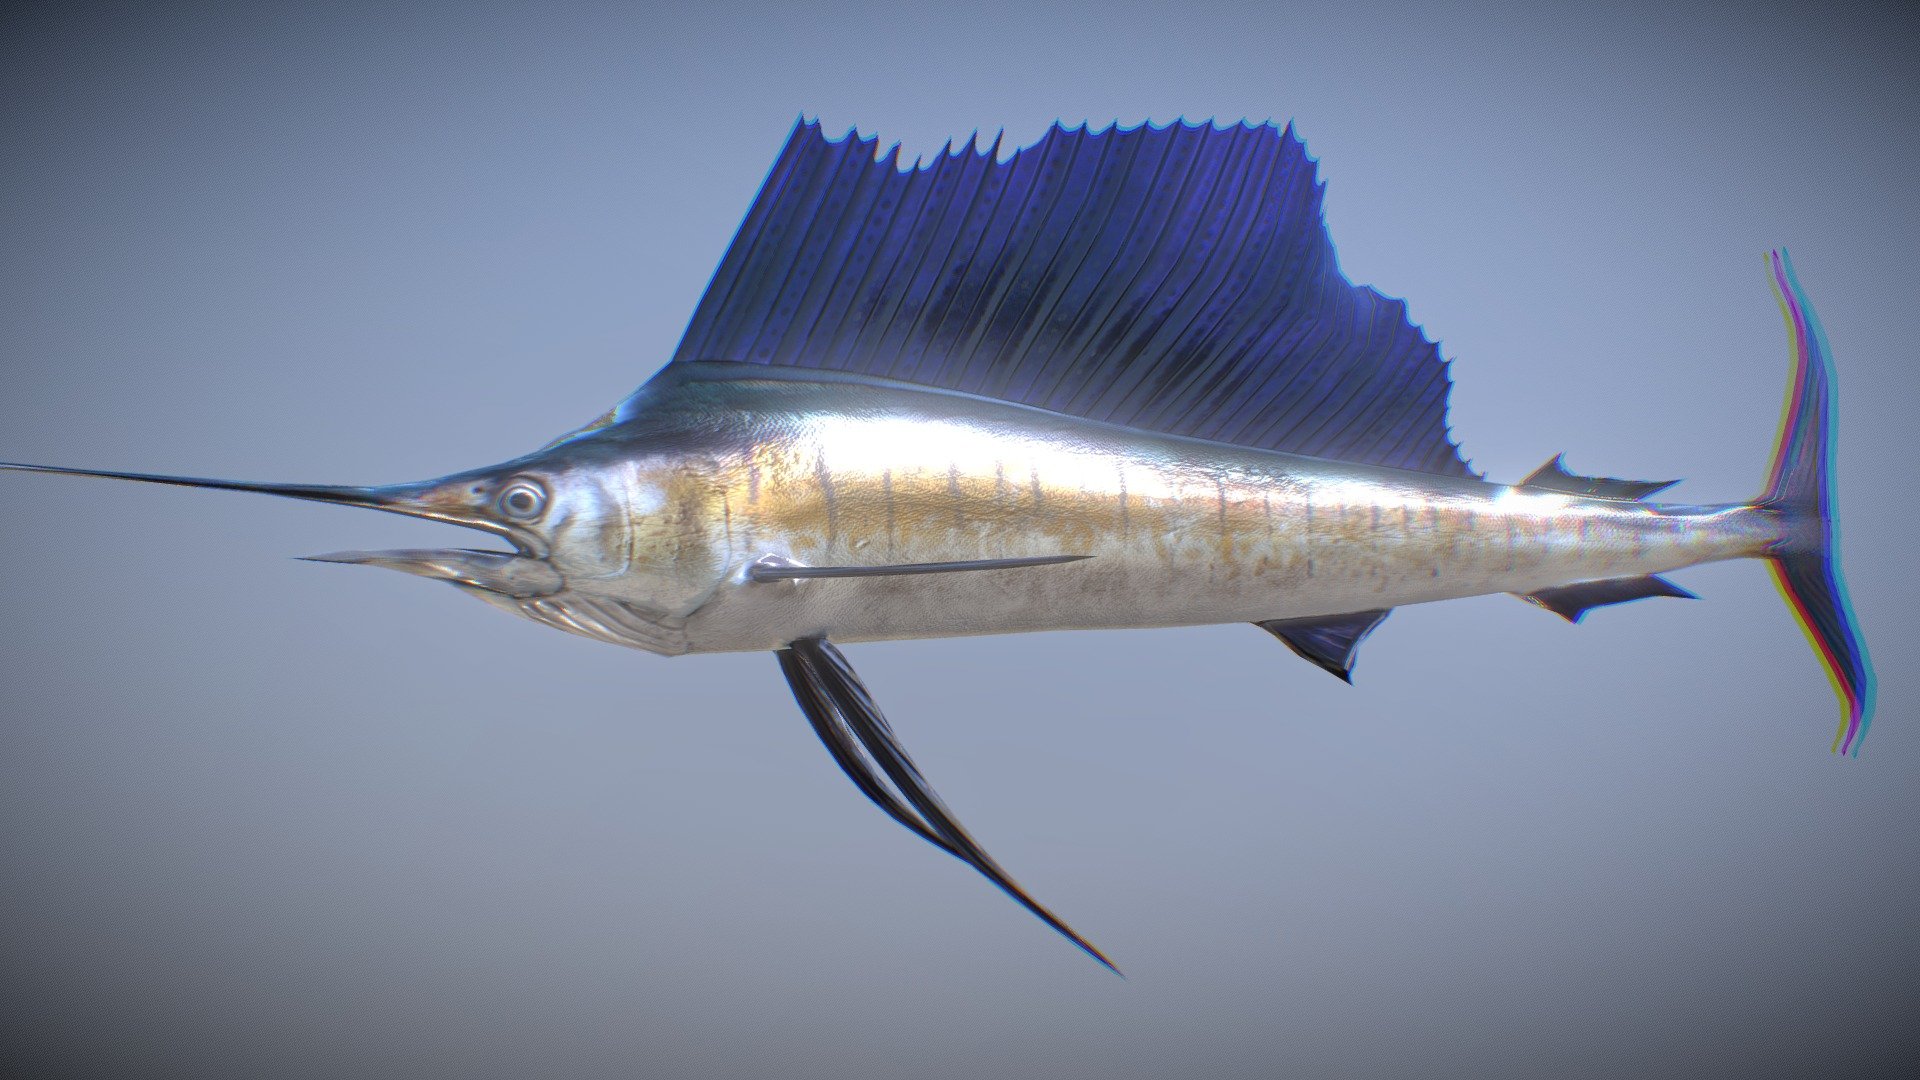 This model is a sailfish made for the game.

I'm tried to make the maximum expression with a small amount of polygon.

Enjoy it! - Pacific sailfish - 3D model by polygizer 3d model